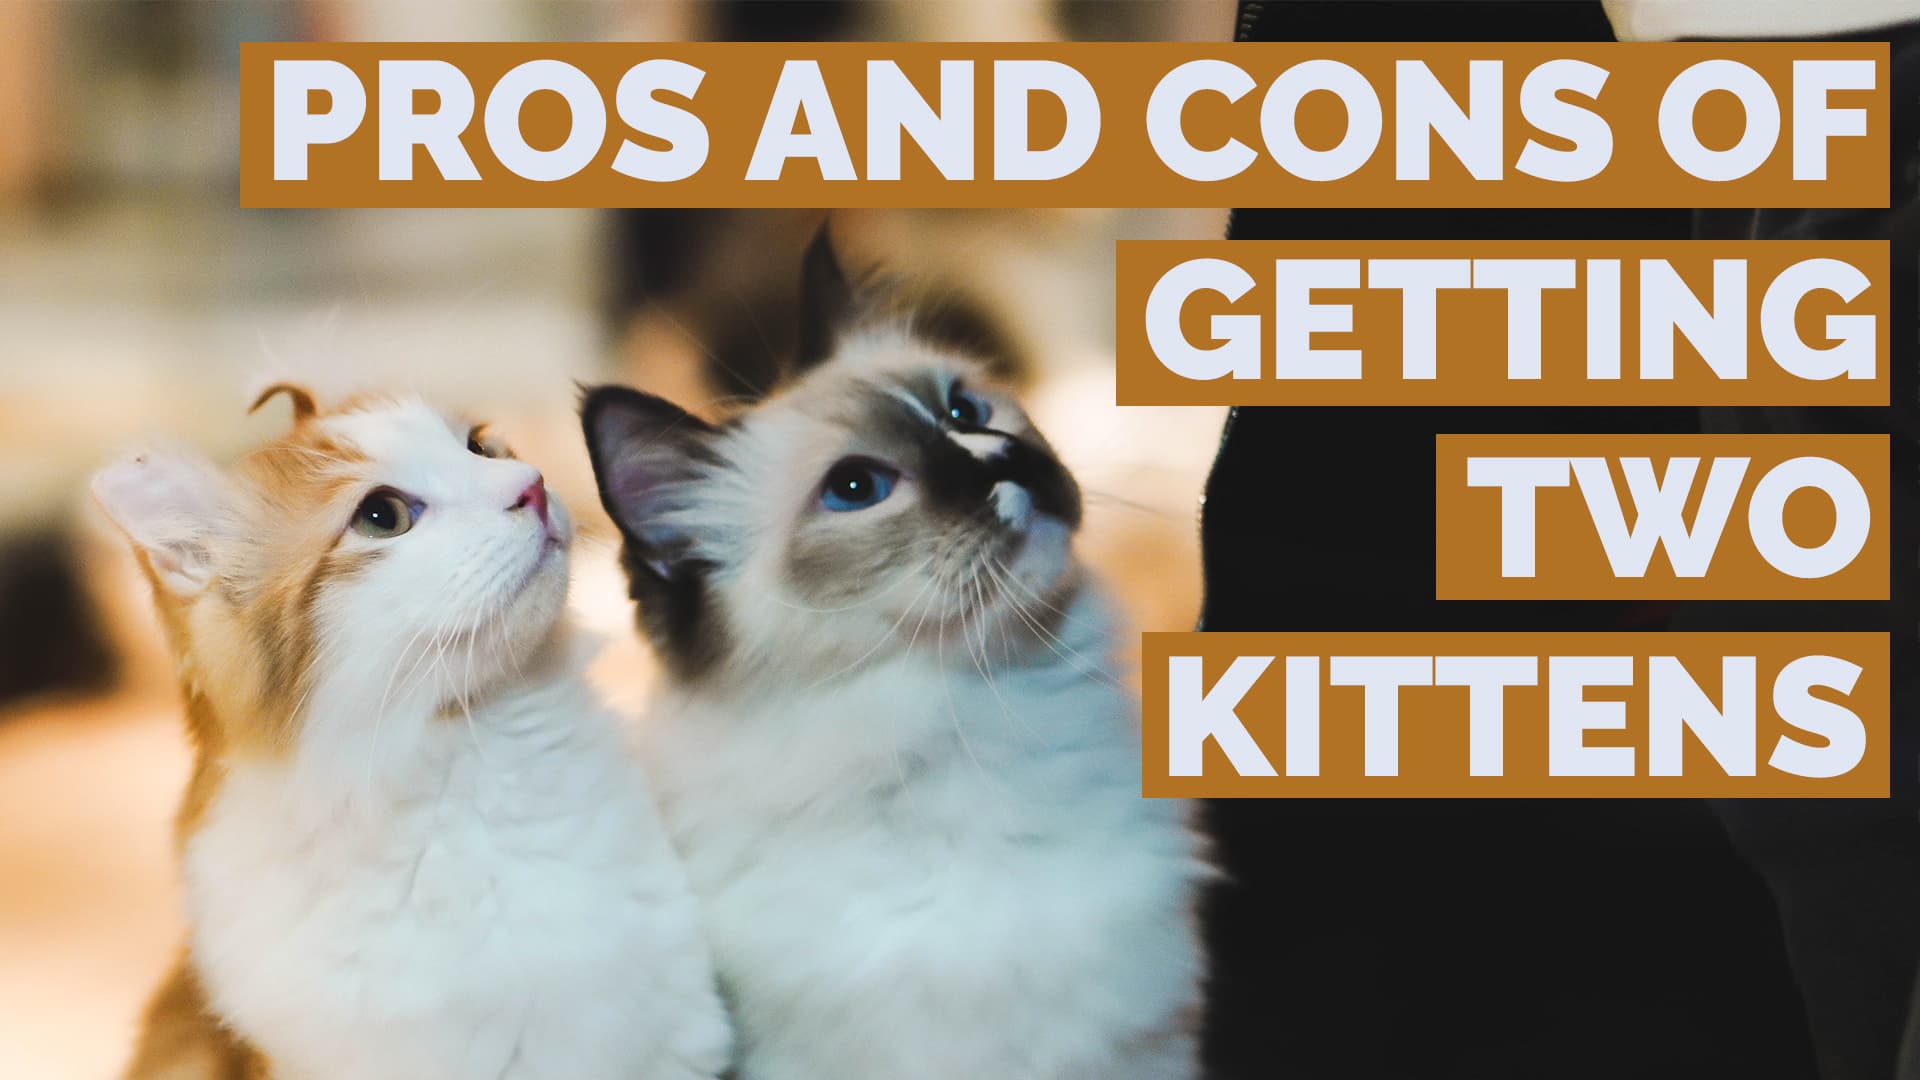 pros and cons of getting two kittens